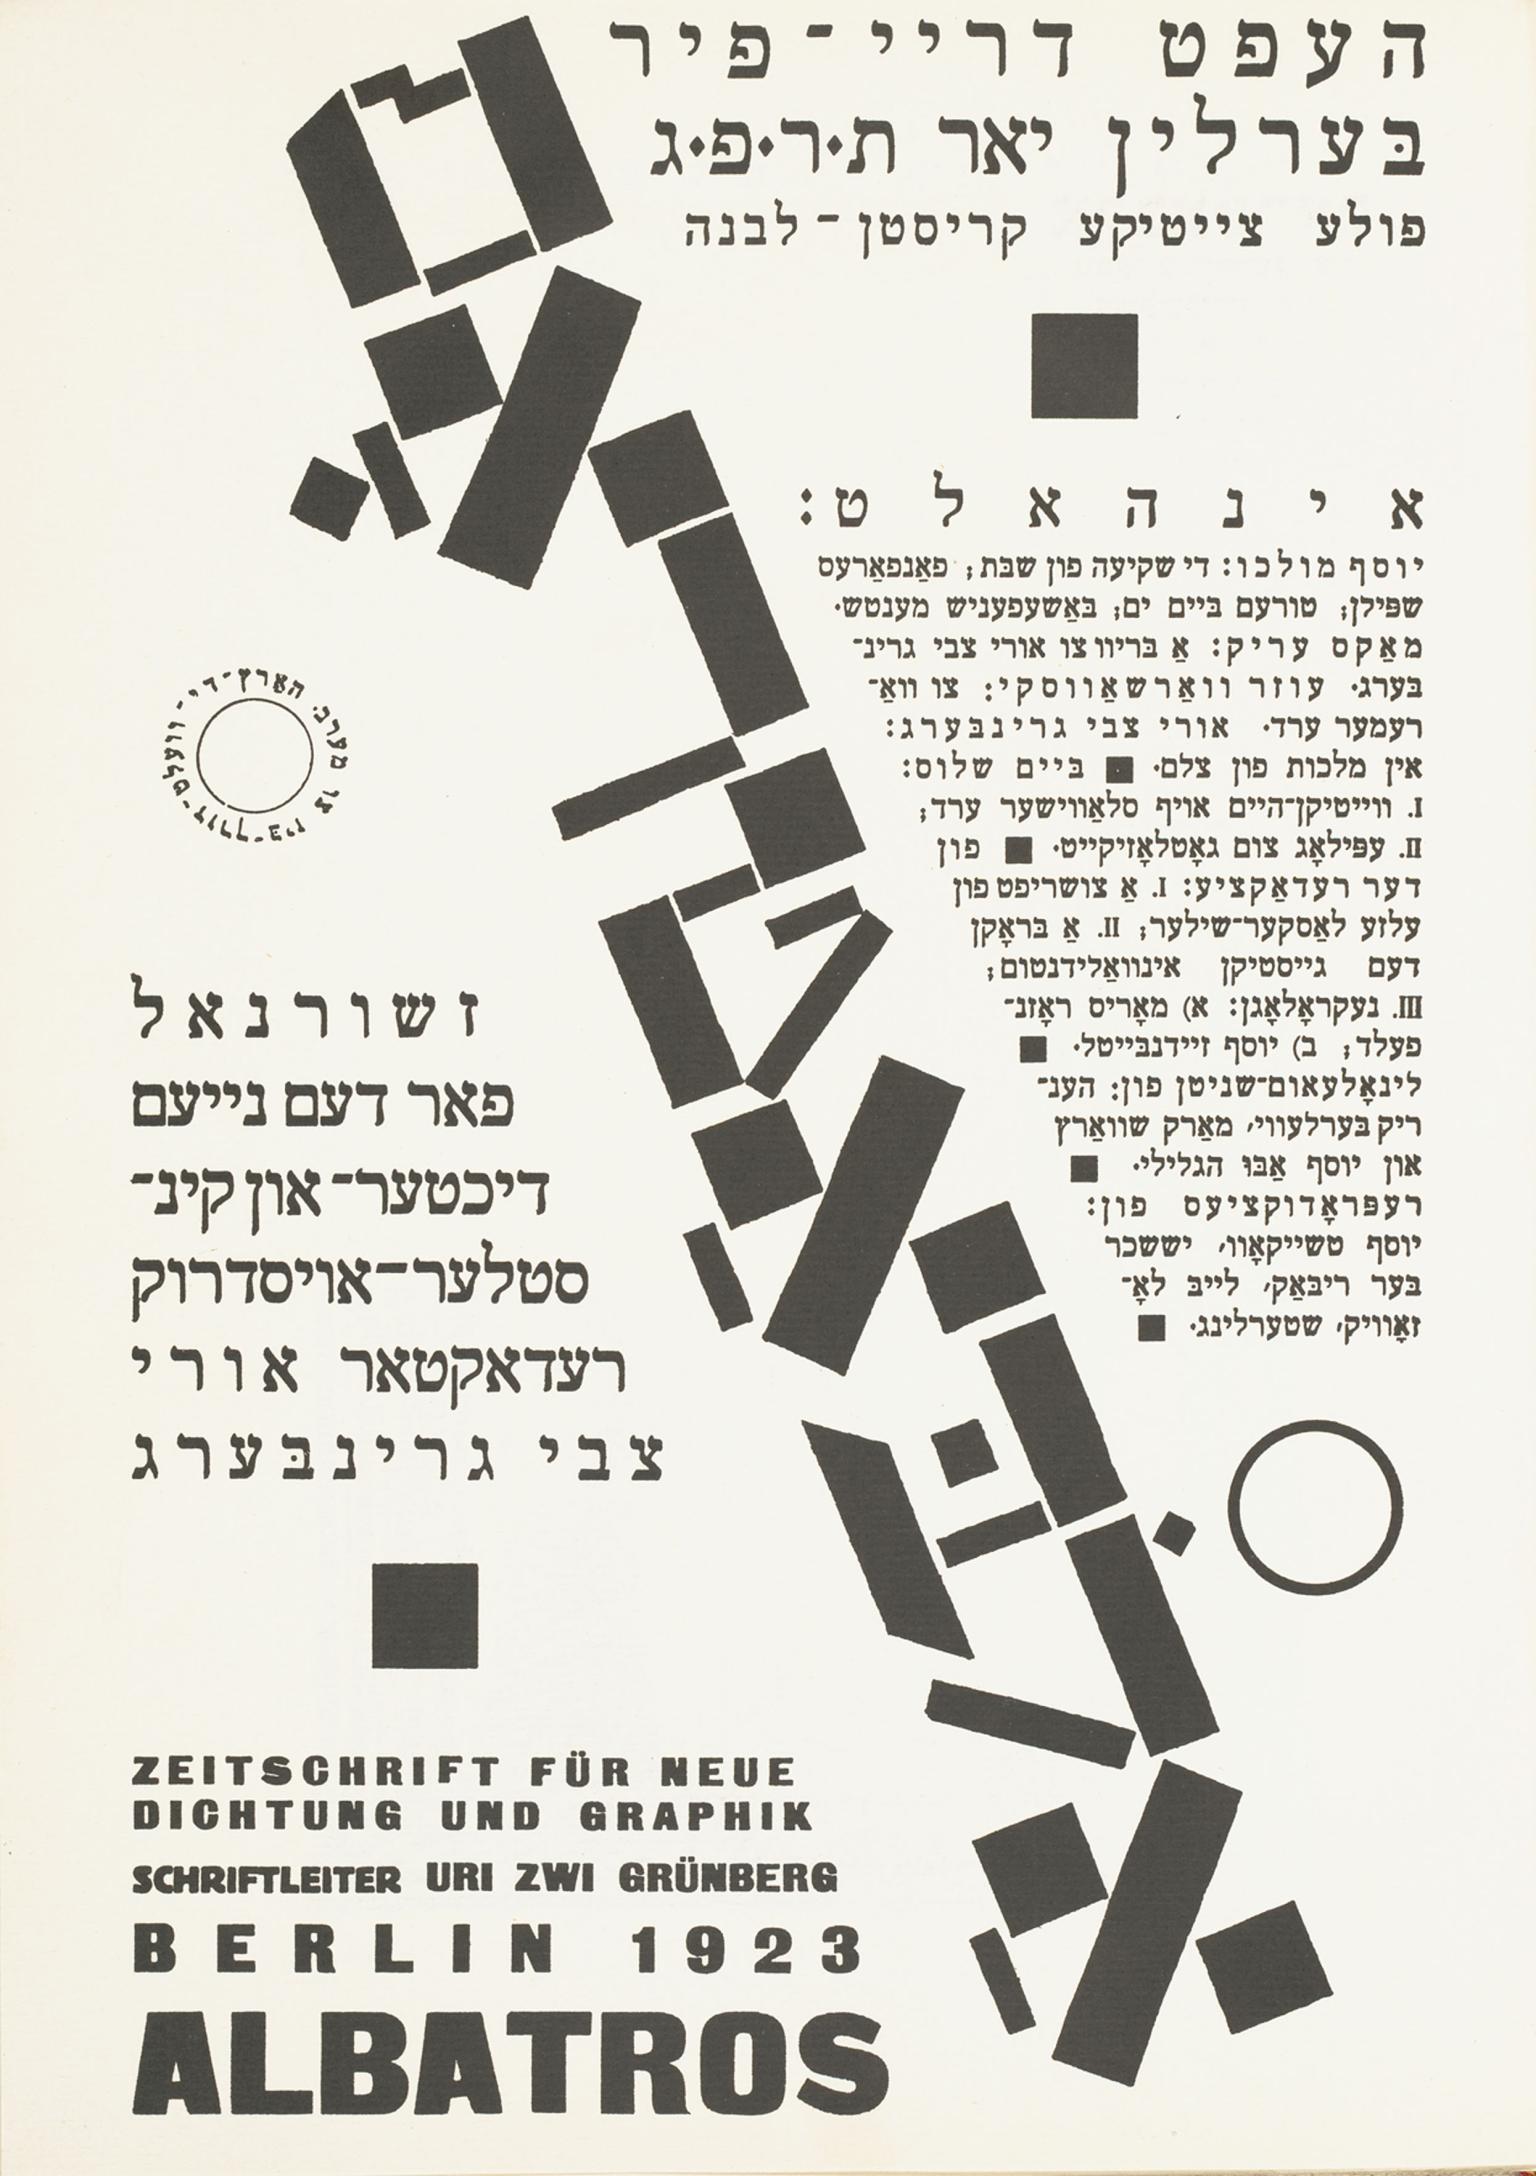 Page with diagonal and horizontal Yiddish and German text.